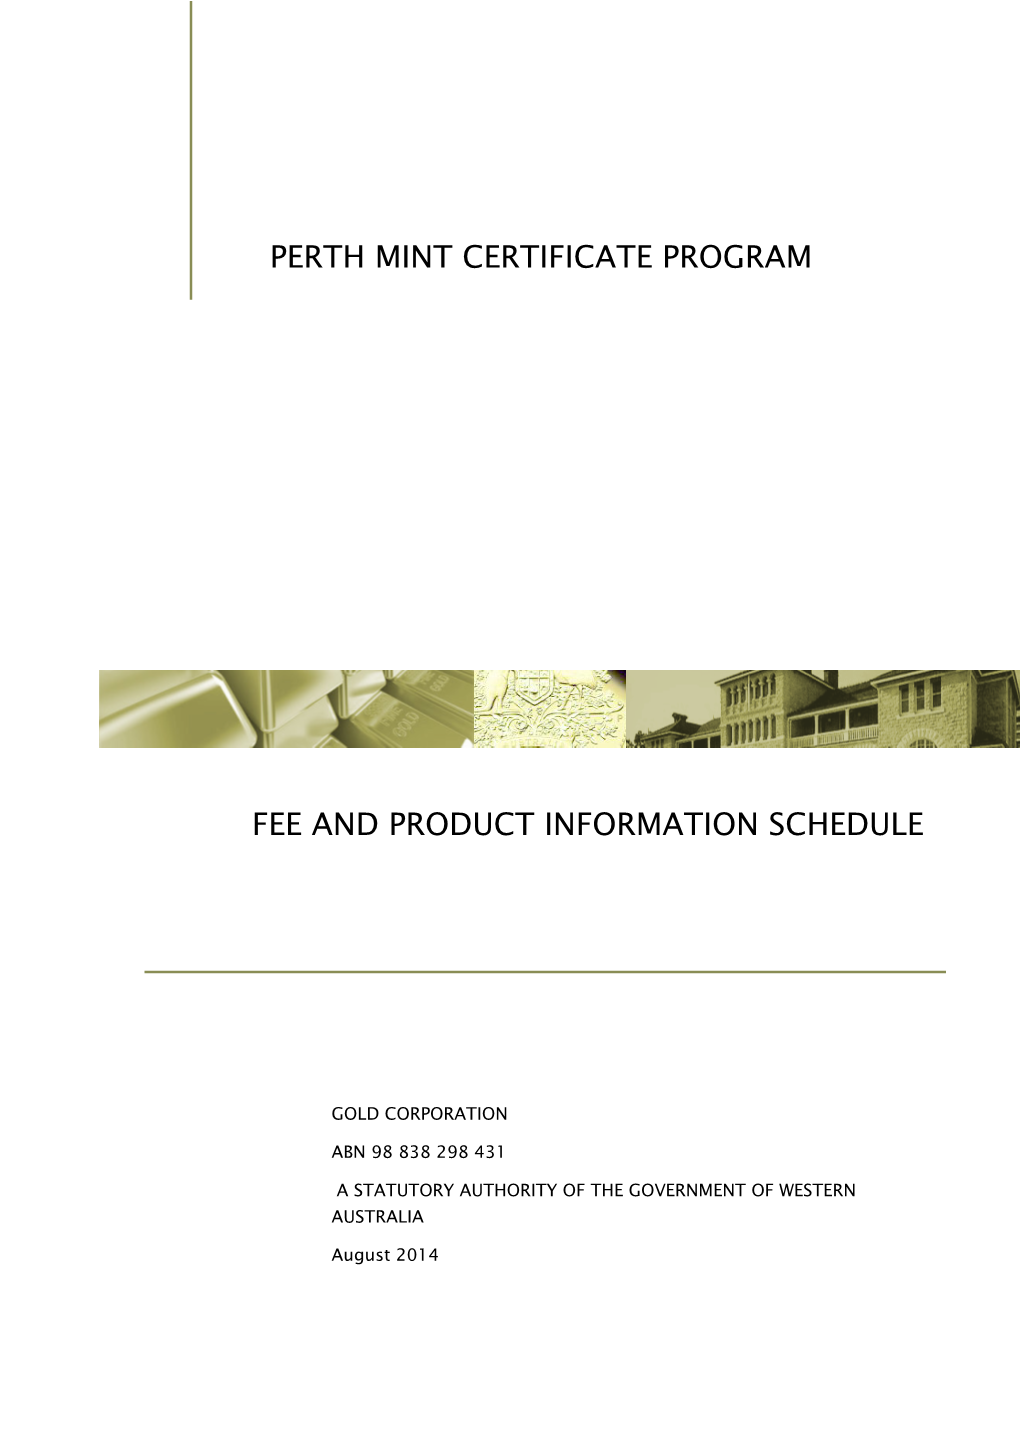 Perth Mint Certificate Program Fee and Product Information Schedule